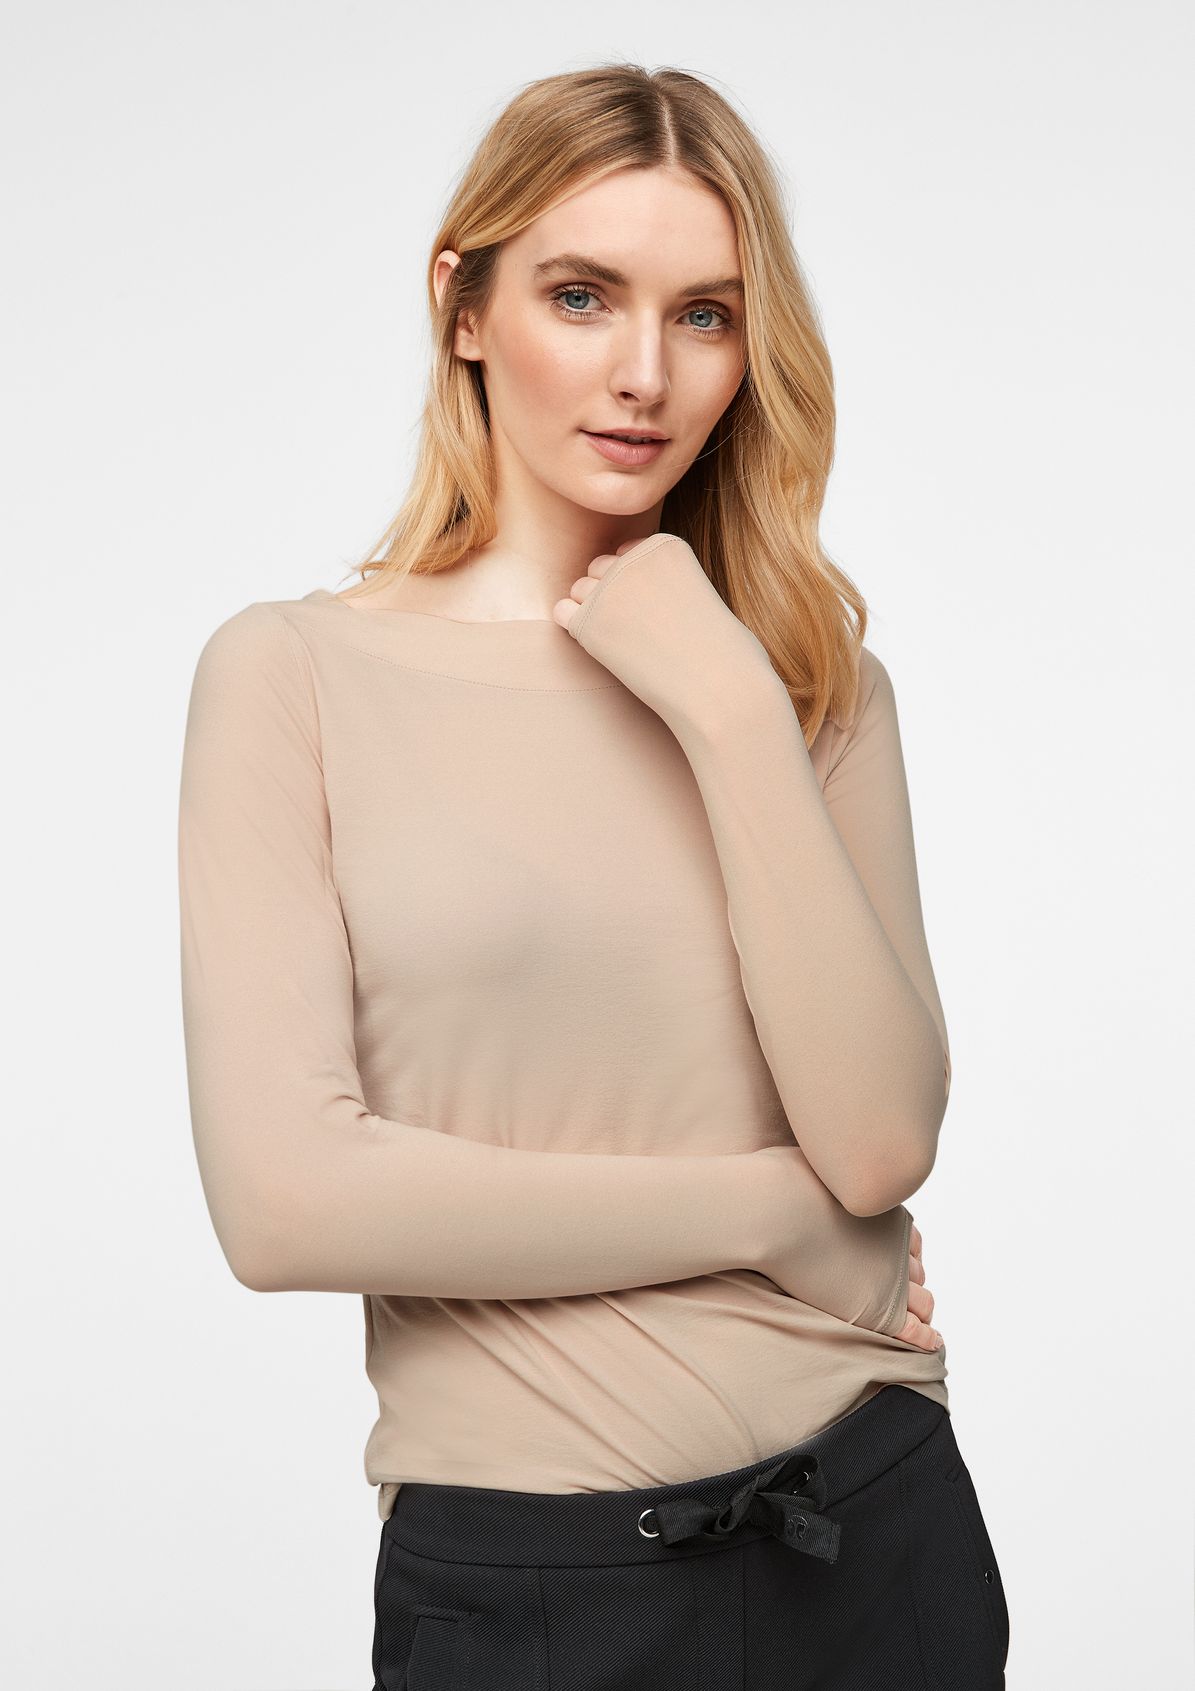 Fine knit jersey top from comma